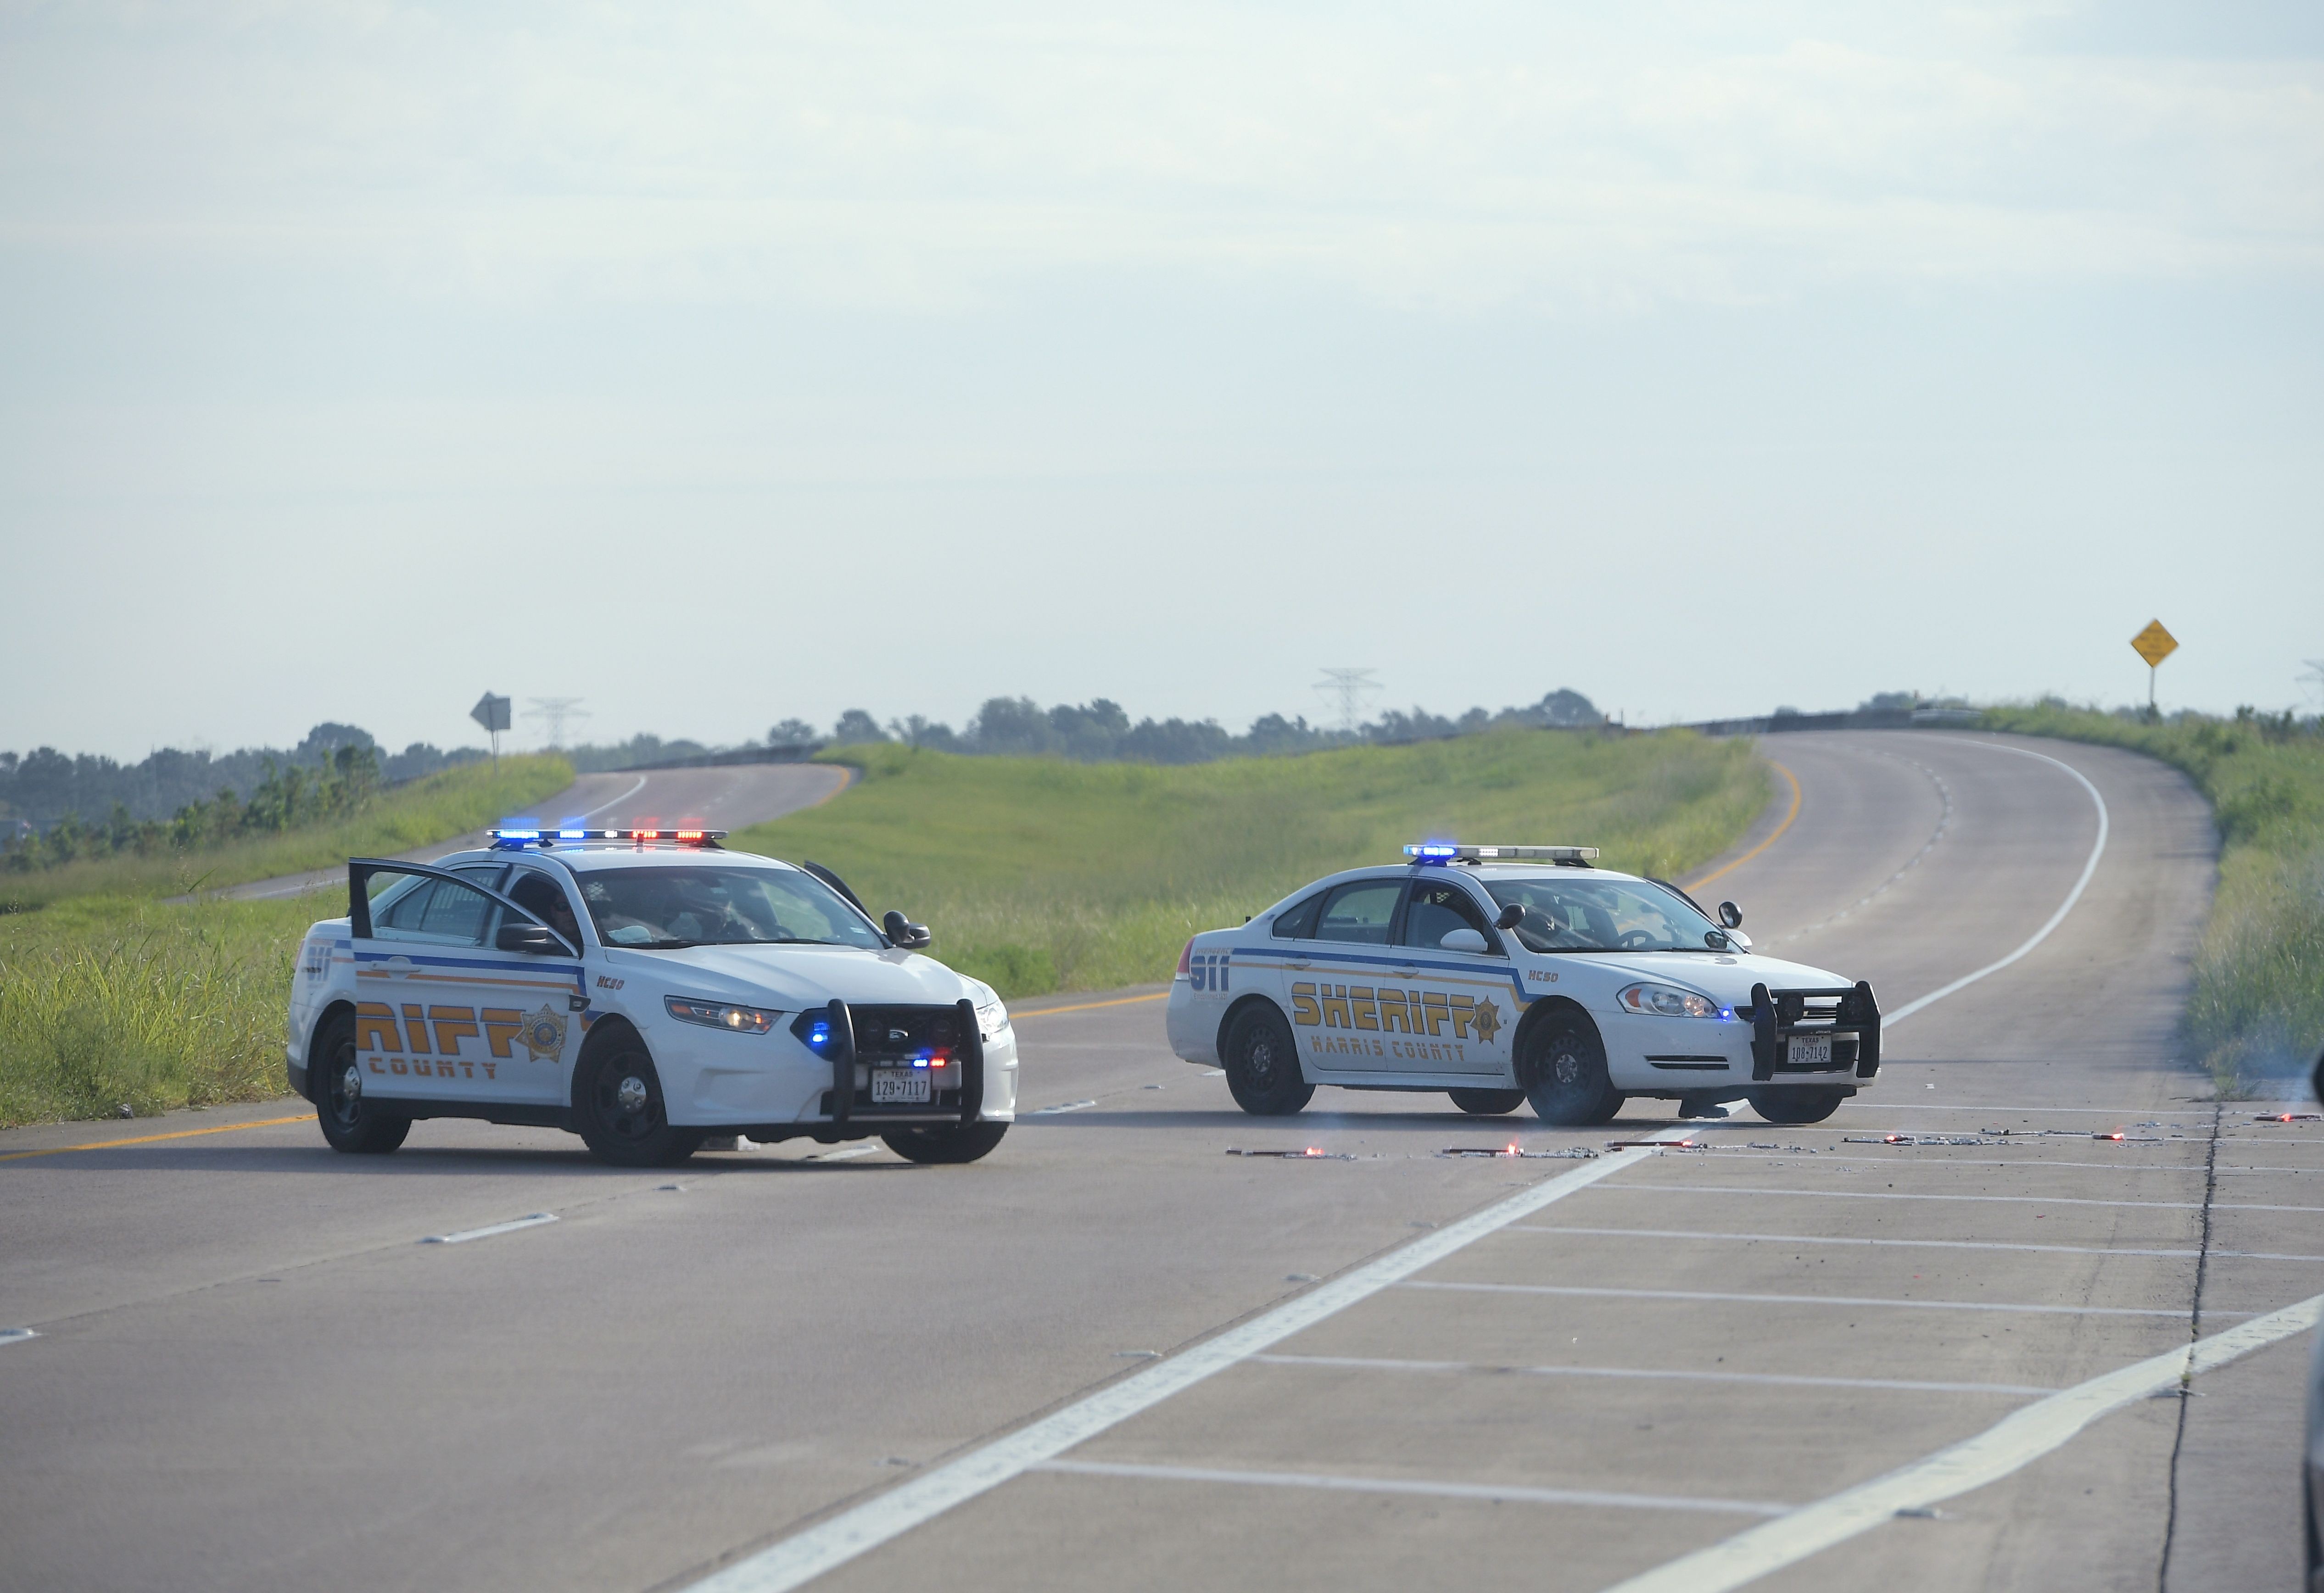 Harris County Sheriff vehicles block the road to the Arkema Chemical Plant in Crosby, Texas. Photo: AFP